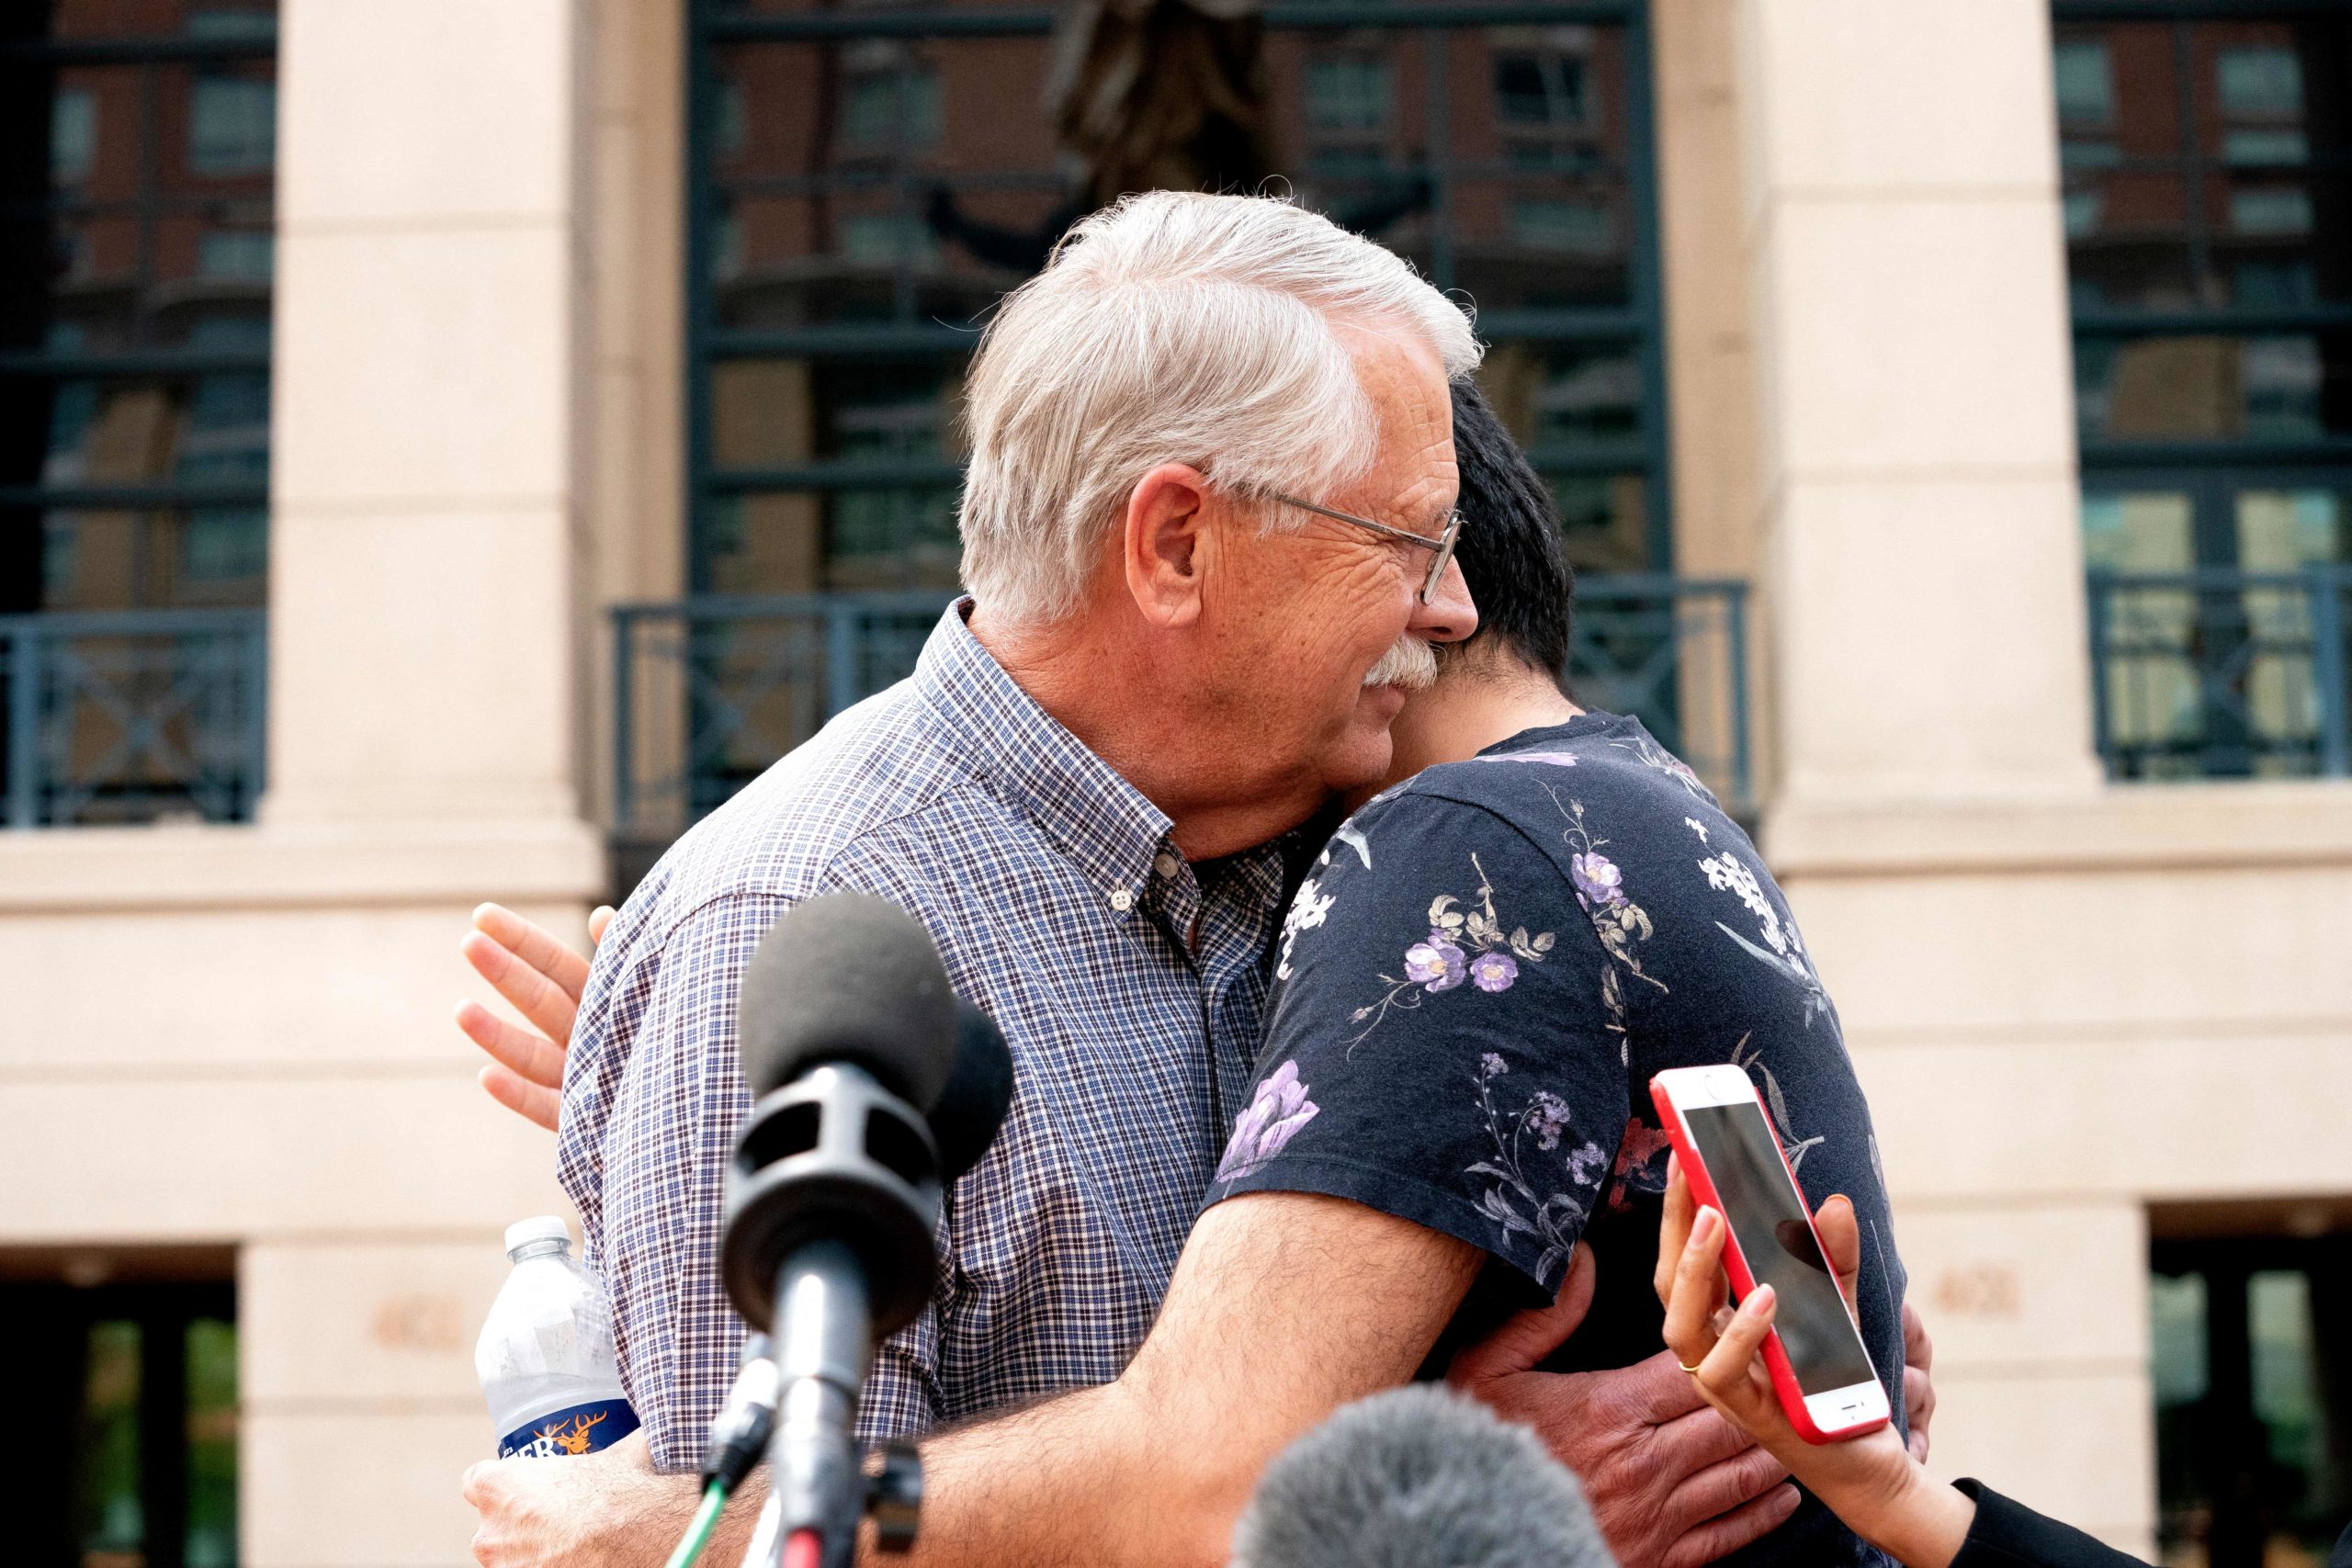 Carl Mueller, the father of Kayla Mueller, an American human rights activist slain by Islamic State militants, embraces Rodwan Safer Jalani, a friend of Kaylas, outside the Albert V. Bryan Federal Courthouse following the trial of IS member El Shafee Elsheikh, the Beatle, in Alexandria, Virginia, on April 14, 2022. - El Shafee Elsheikh, a member of the notorious Islamic State kidnap-and-murder cell known as the "Beatles," was found guilty of all charges on April 14, 2022 in the deaths of four American hostages in Syria. STEFANI REYNOLDS/AFP via Getty Images